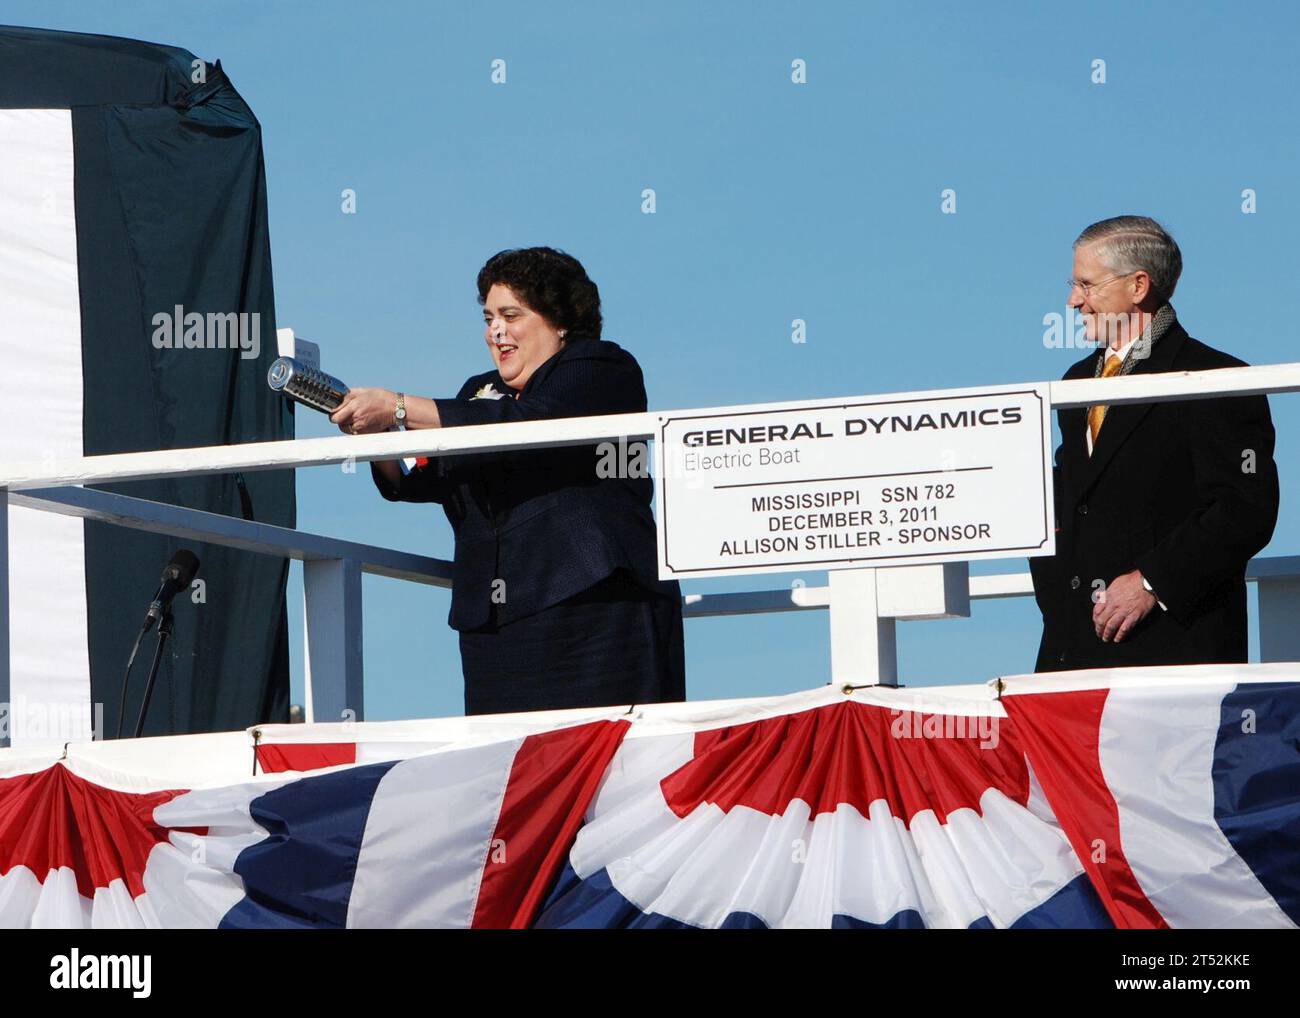 111203AW324-148 GROTON, Conn. (Dec. 3, 2011) Ship sponsor Allison Stiller, left, prepares to christen the Virginia-class attack submarine Pre-Commissioning Unit (PCU) Mississippi (SSN 782) as John Casey, president of General Dynamics Electric Boat, looks on during a christening ceremony in Groton, Conn. Mississippi is the ninth Virginia-class submarine and the fifth U.S. Navy ship to be named for the Magnolia State. Navy Stock Photo